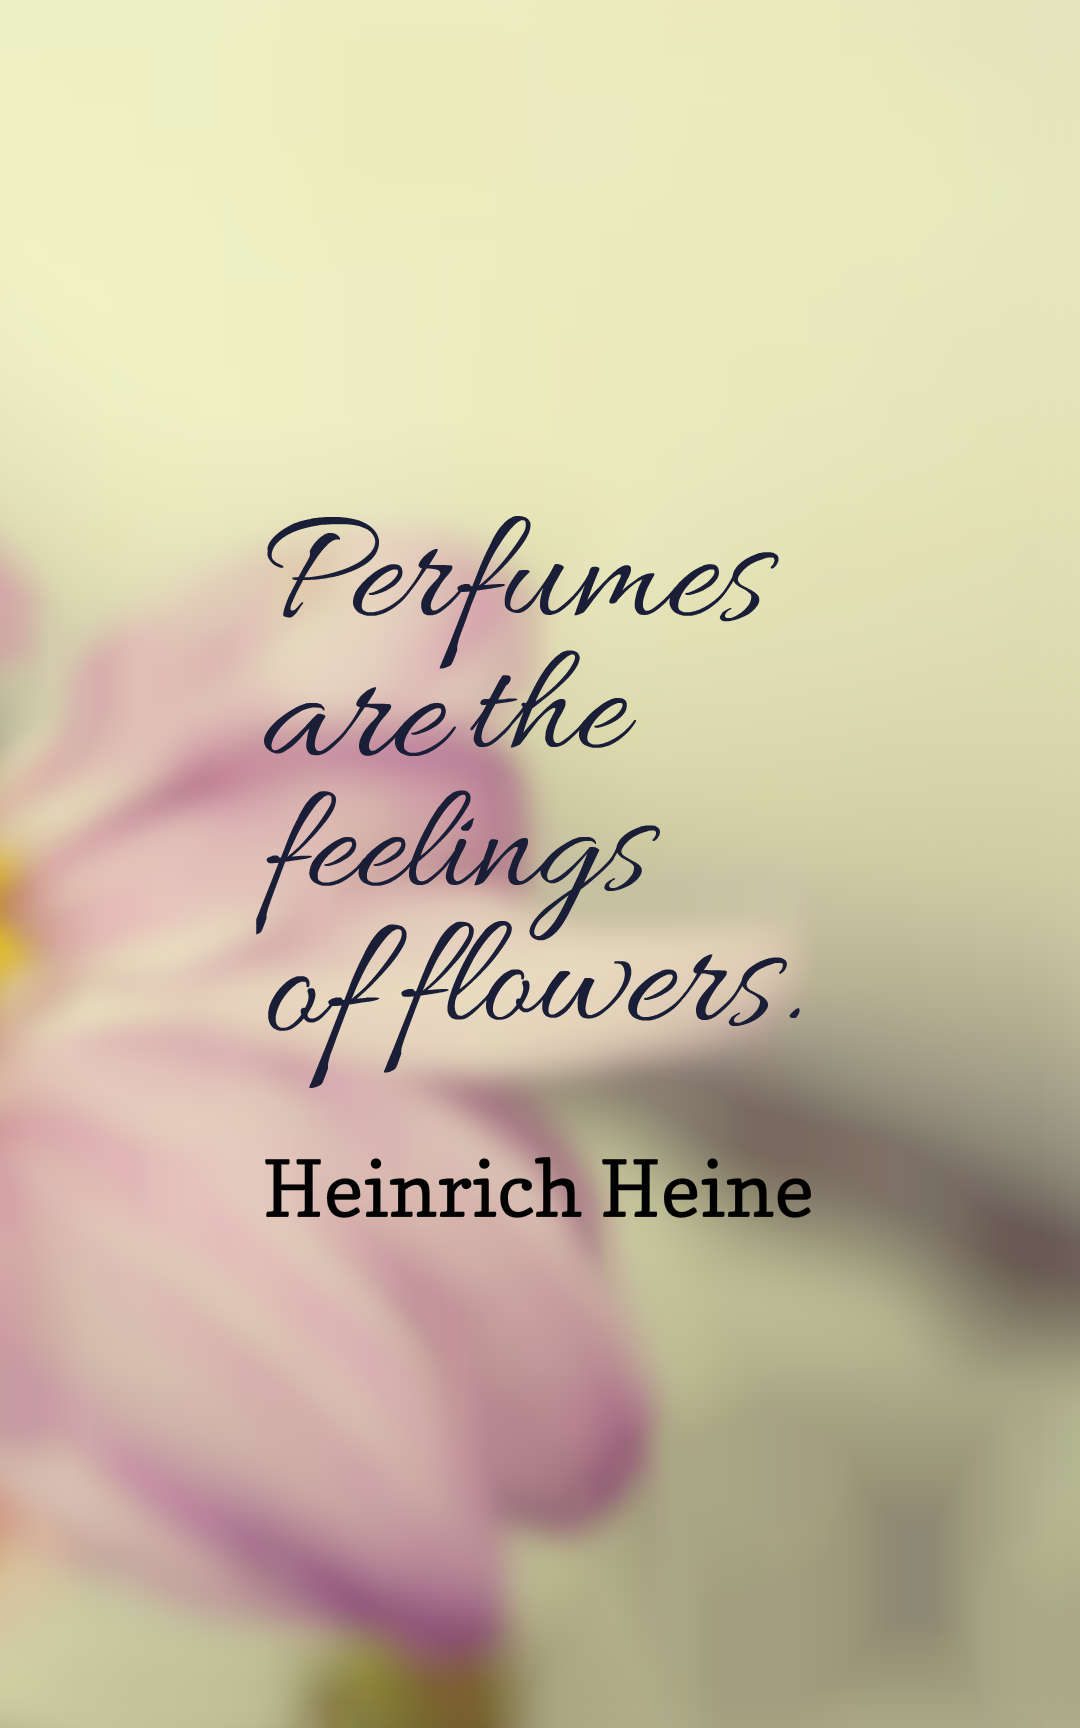 Perfumes are the feelings of flowers.